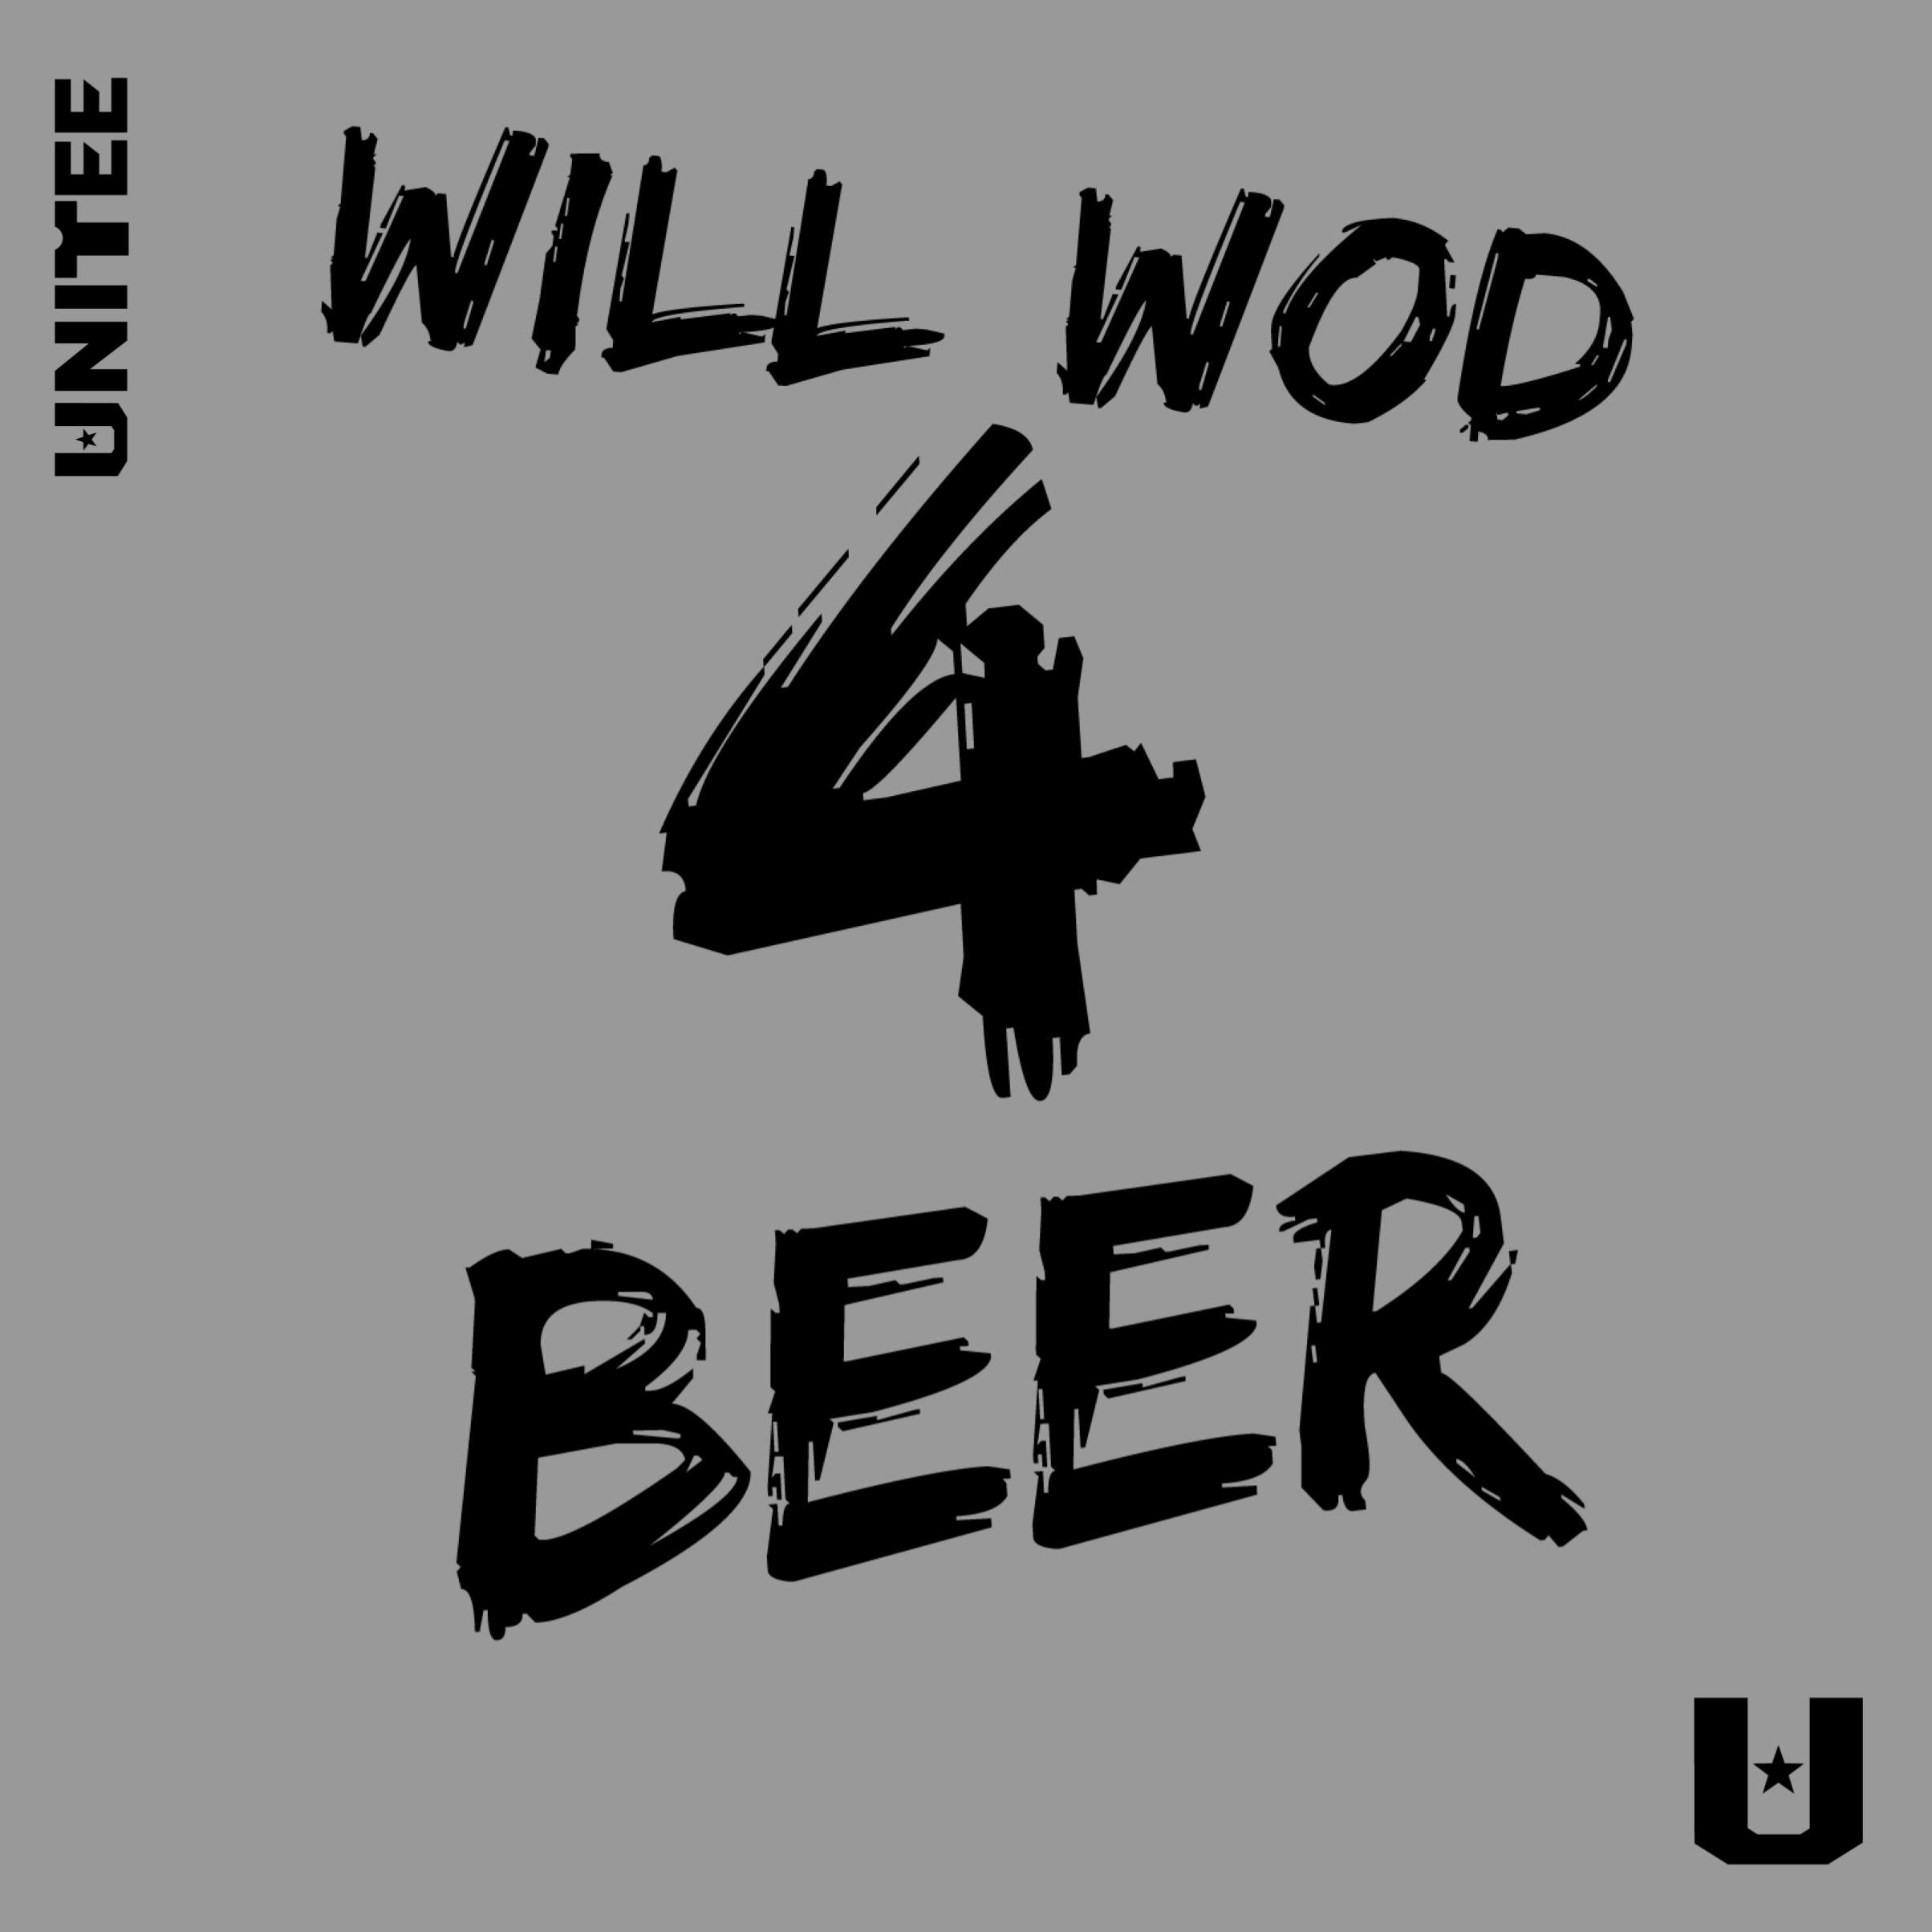 Will WOD 4 Beer